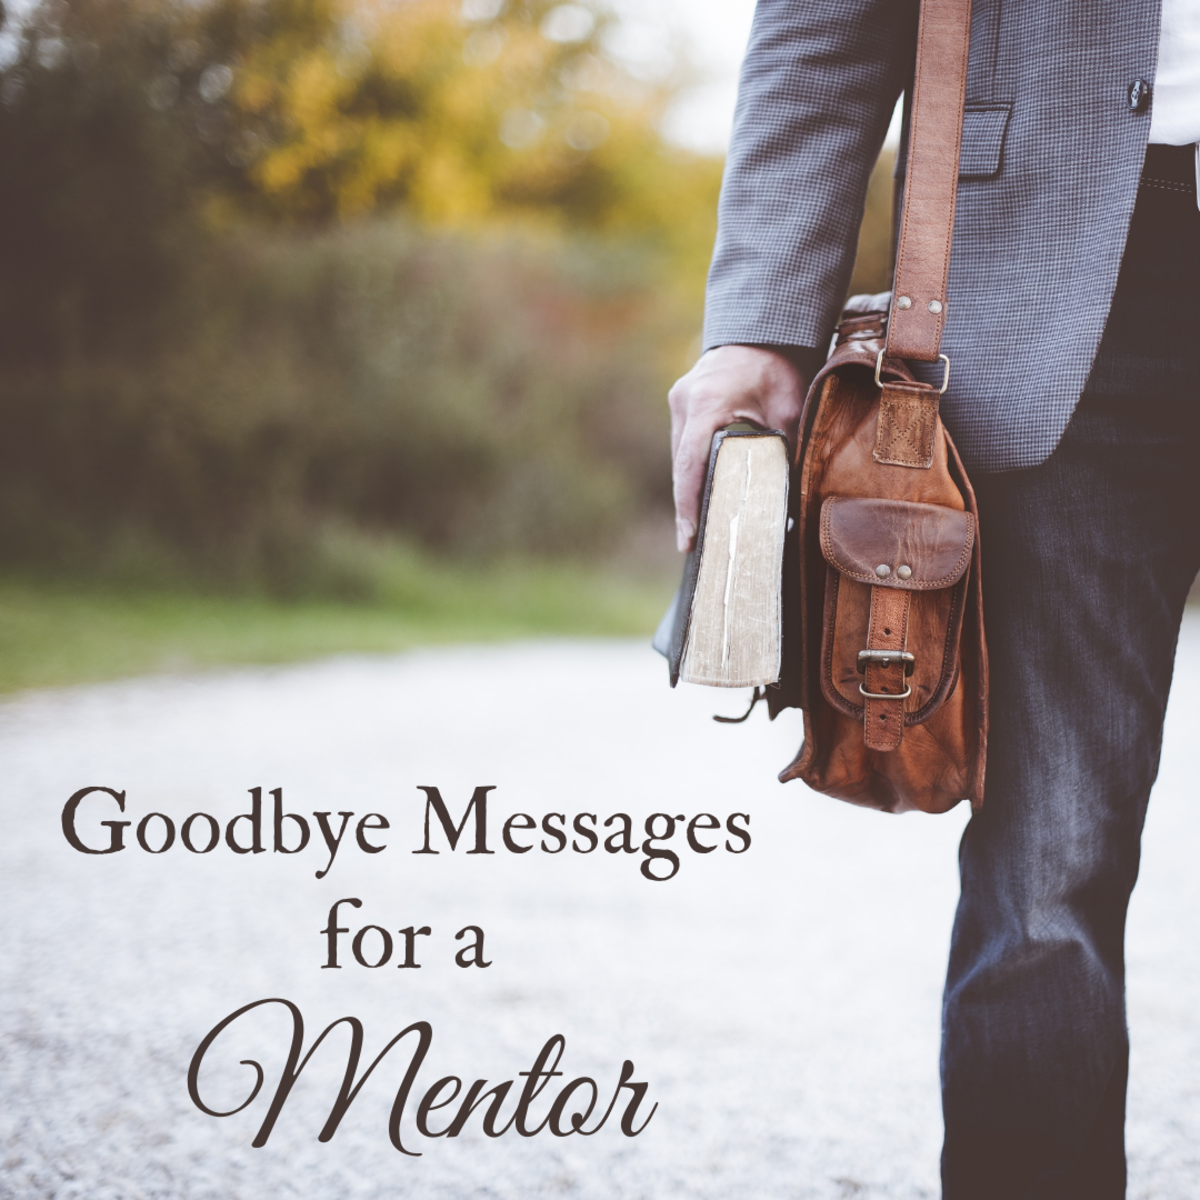 Saying goodbye to a beloved teacher or mentor can be difficult—use these heartfelt examples to write a sweet and powerful message to thank them for their mentorship.